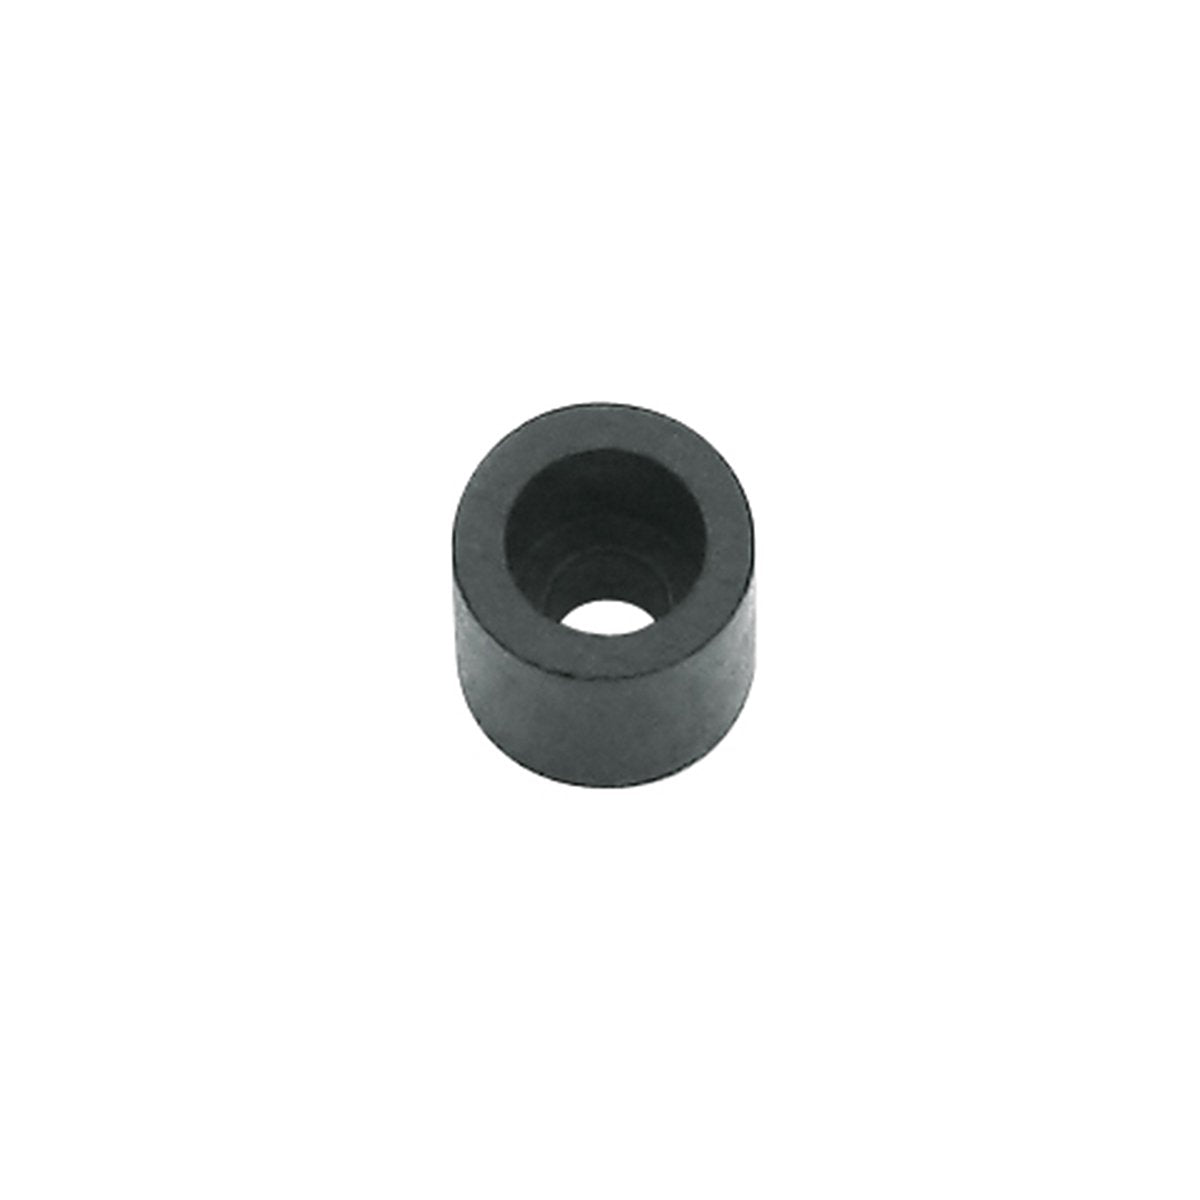 SKS - Pump Parts - Schrader Rubber Washer Replacement for #2371